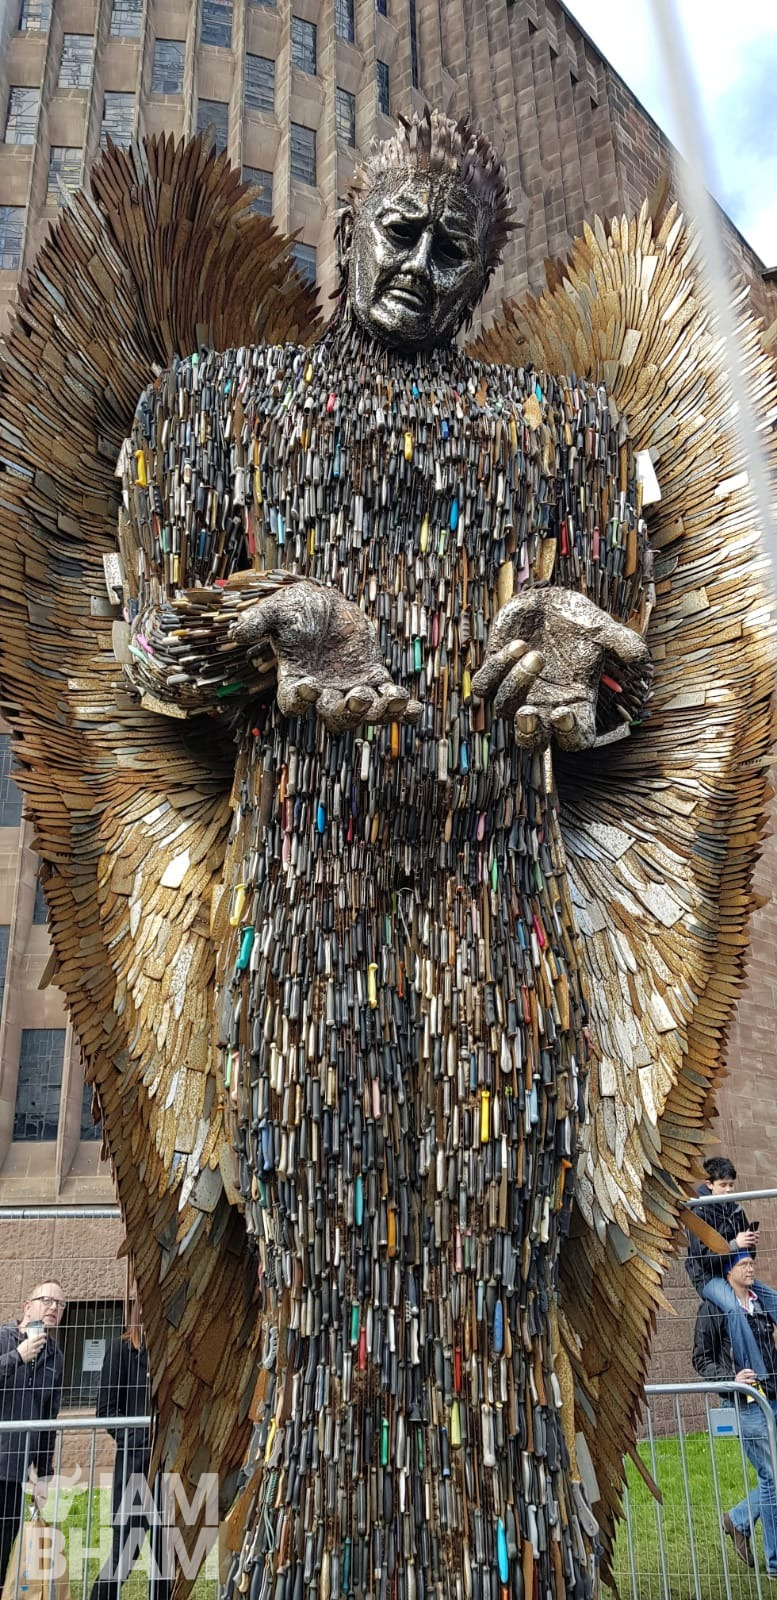 The Knife Angel was previously on display in Coventry 